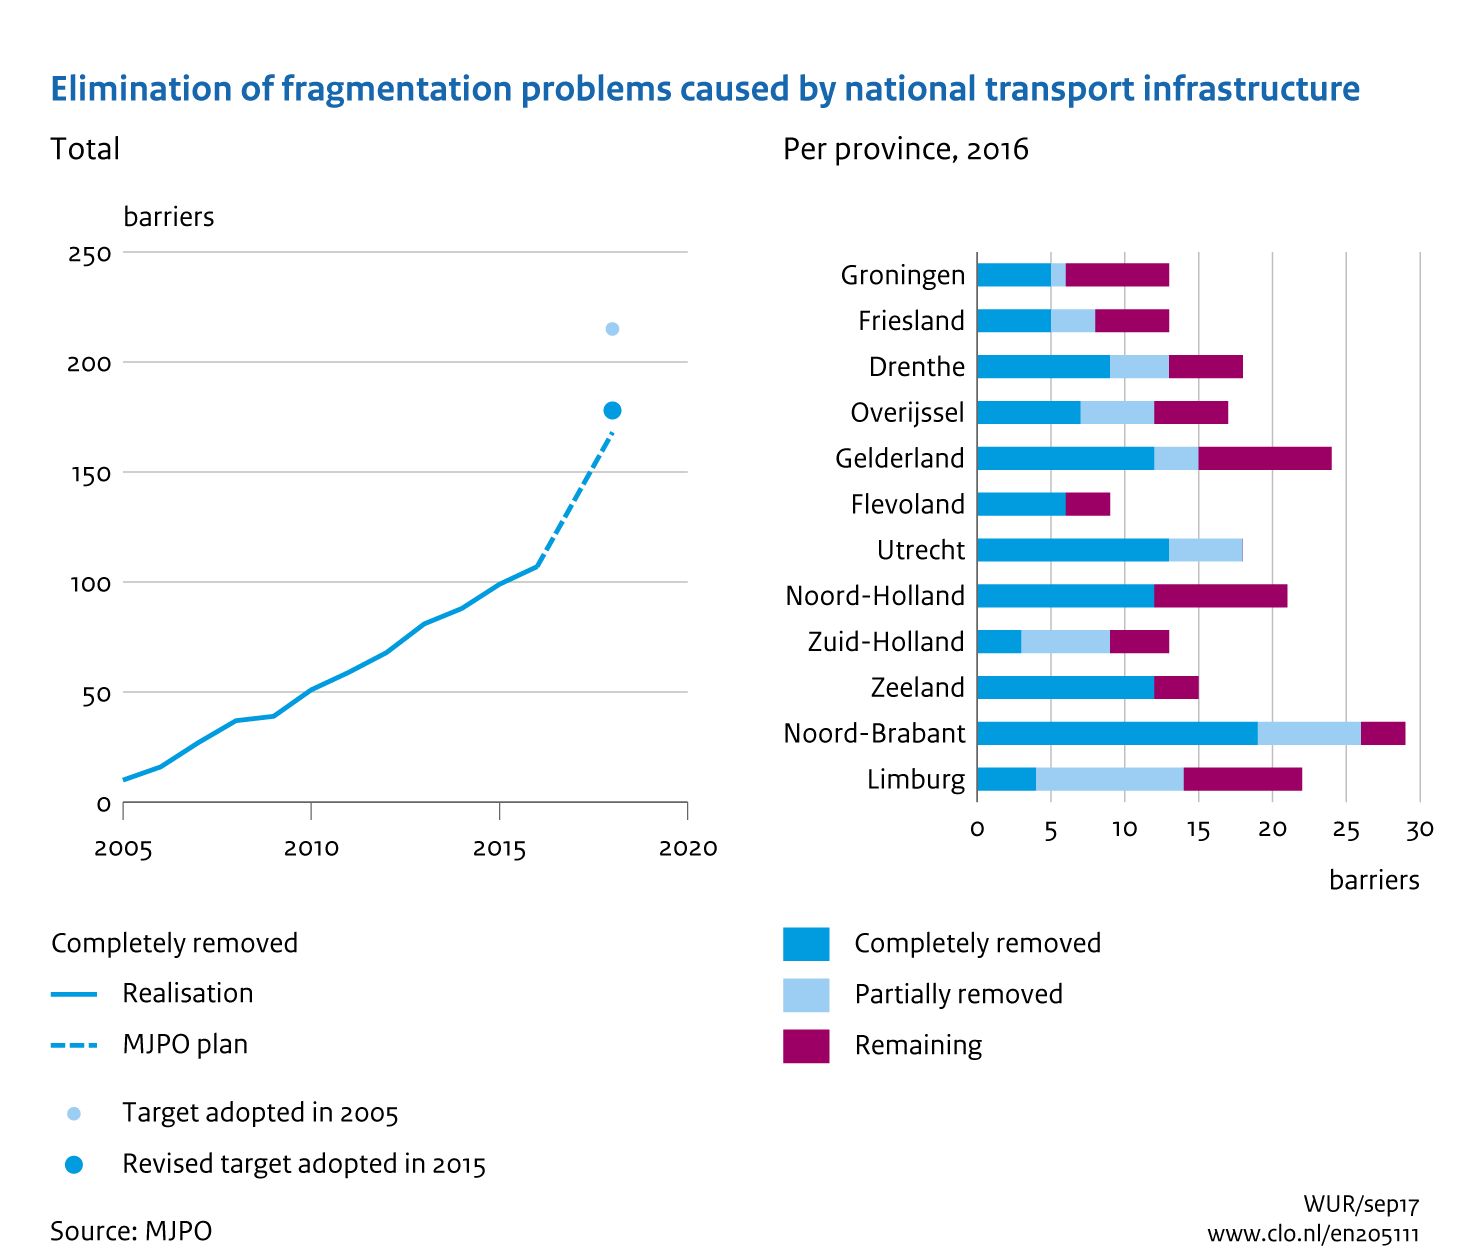 Image Elimination of fragmentation problems caused by national transport infrastructure. The image is further explained in the text.